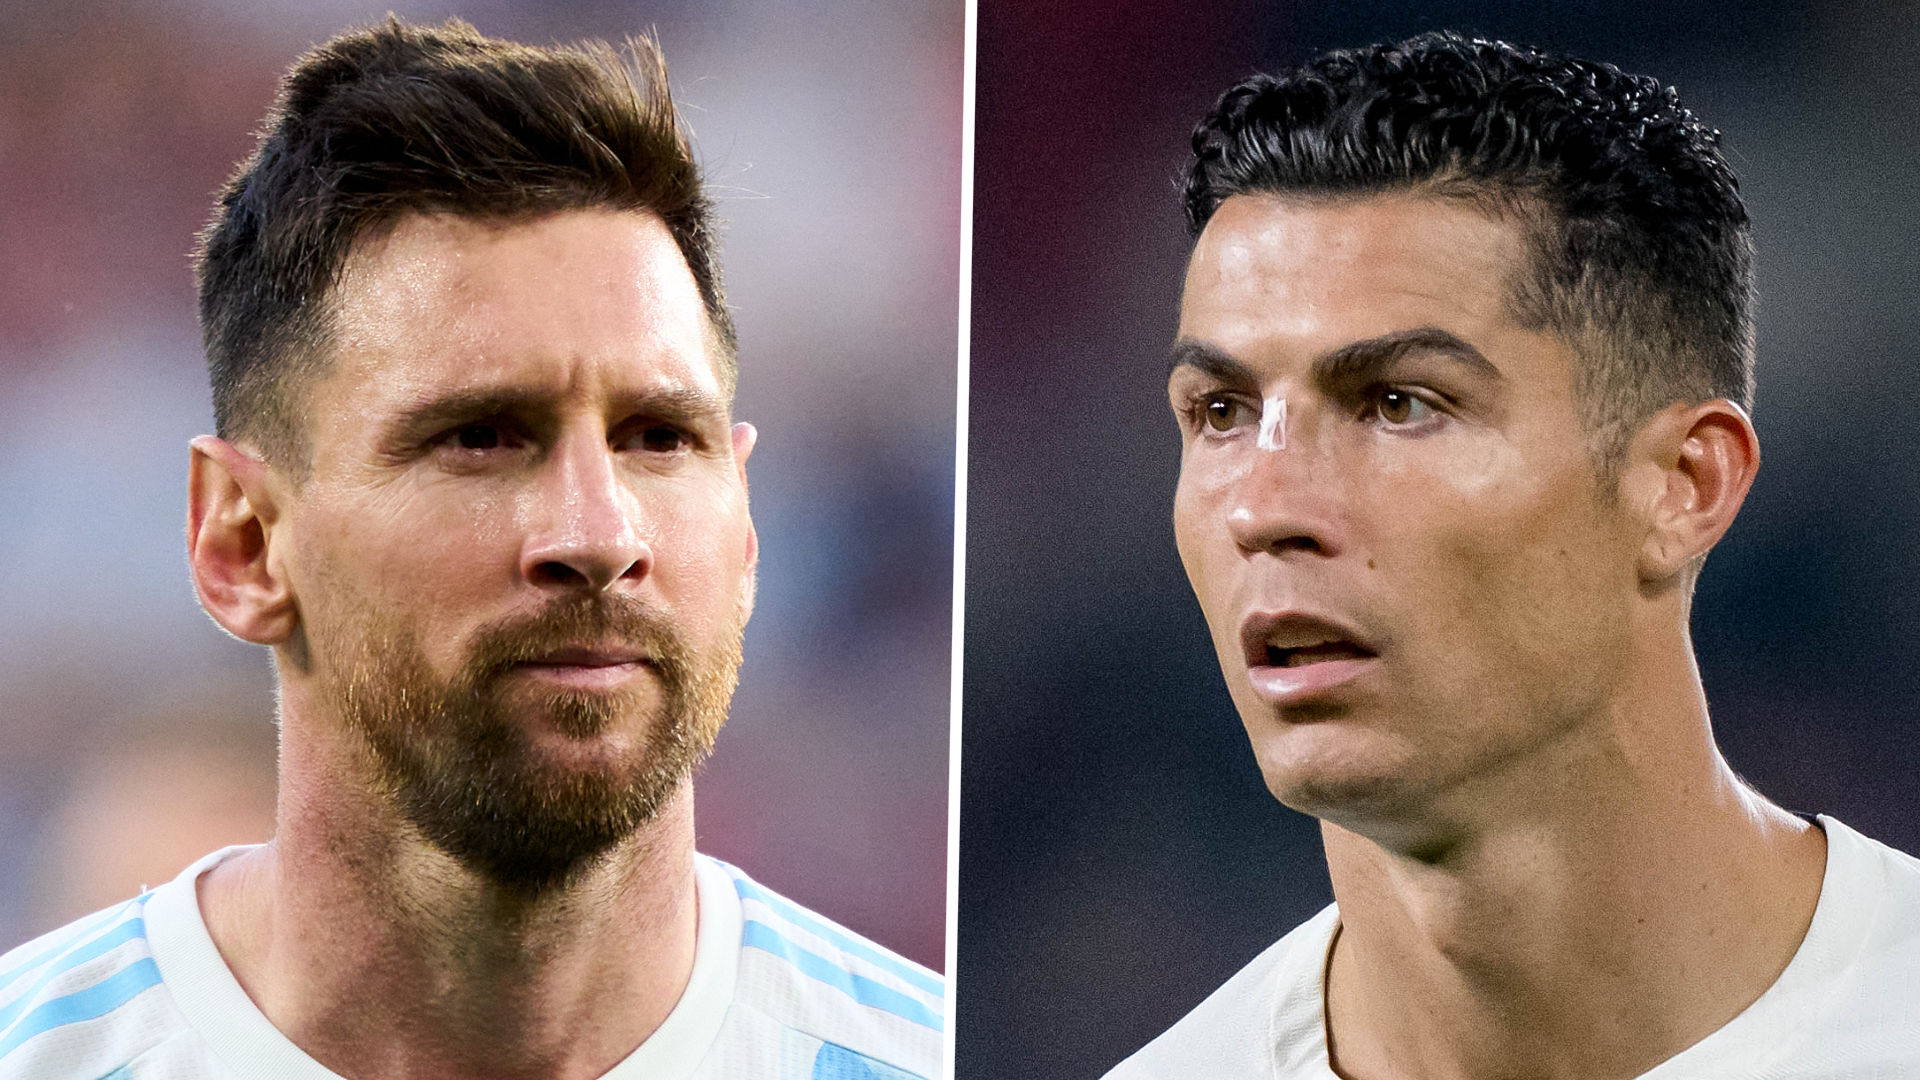 Messi and Ronaldo chess match in Louis Vuitton campaign is from a